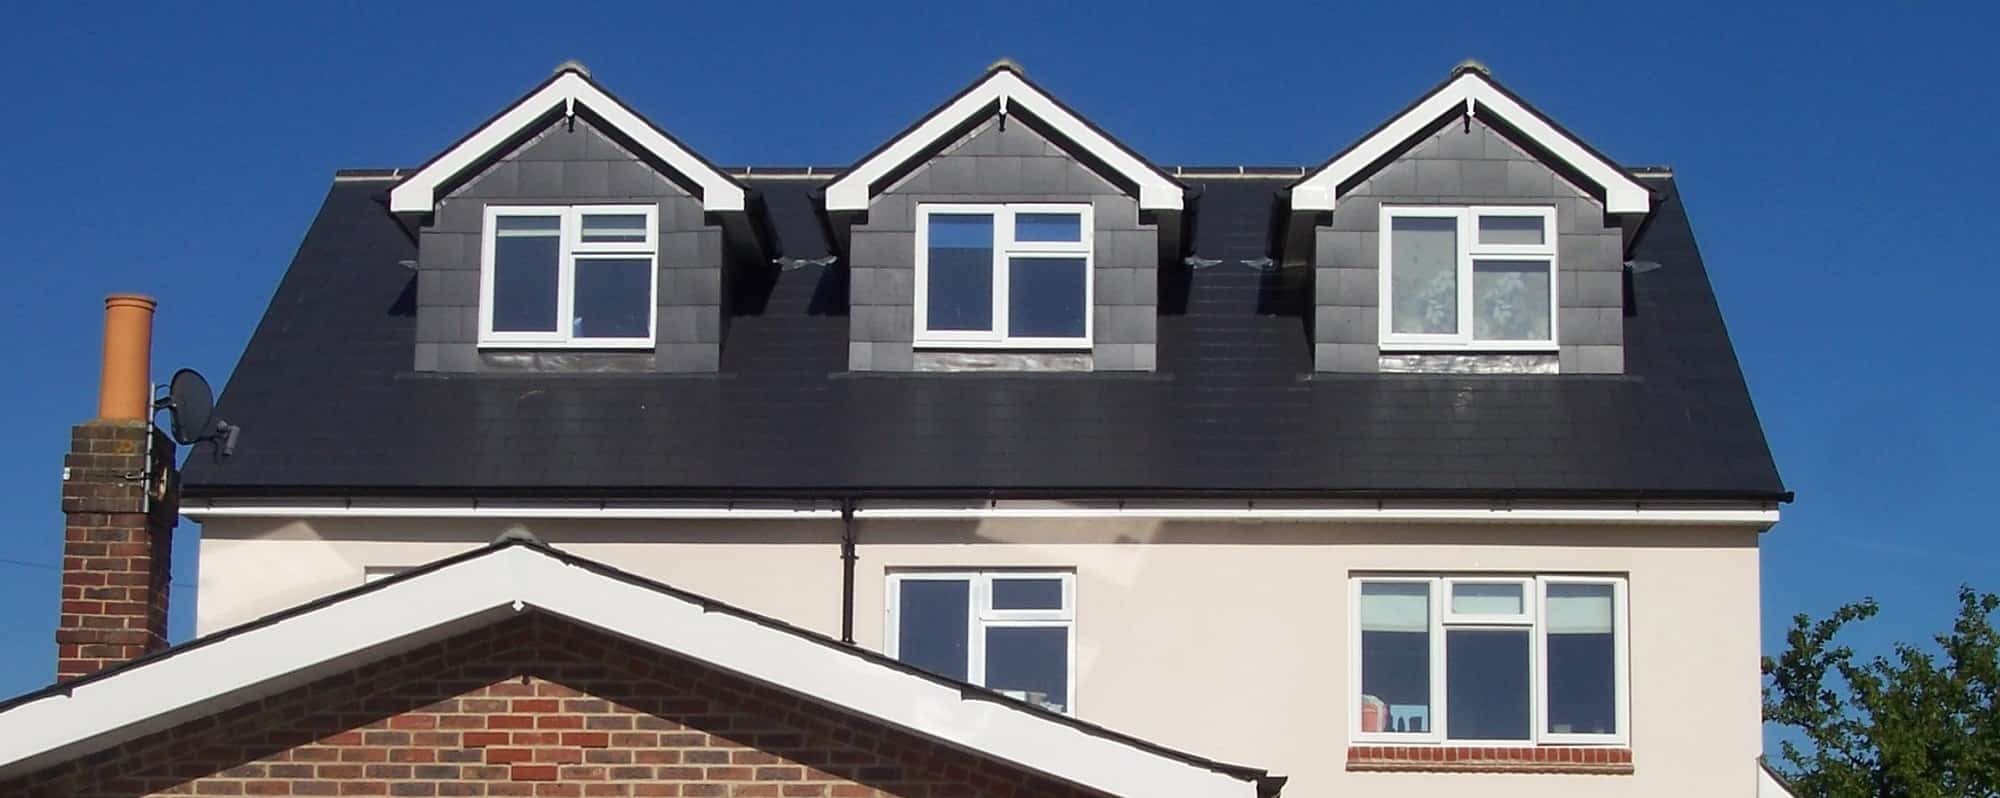 Detached house in Portsmouth loft conversion and side extension with slate dormers to front and rear elevations